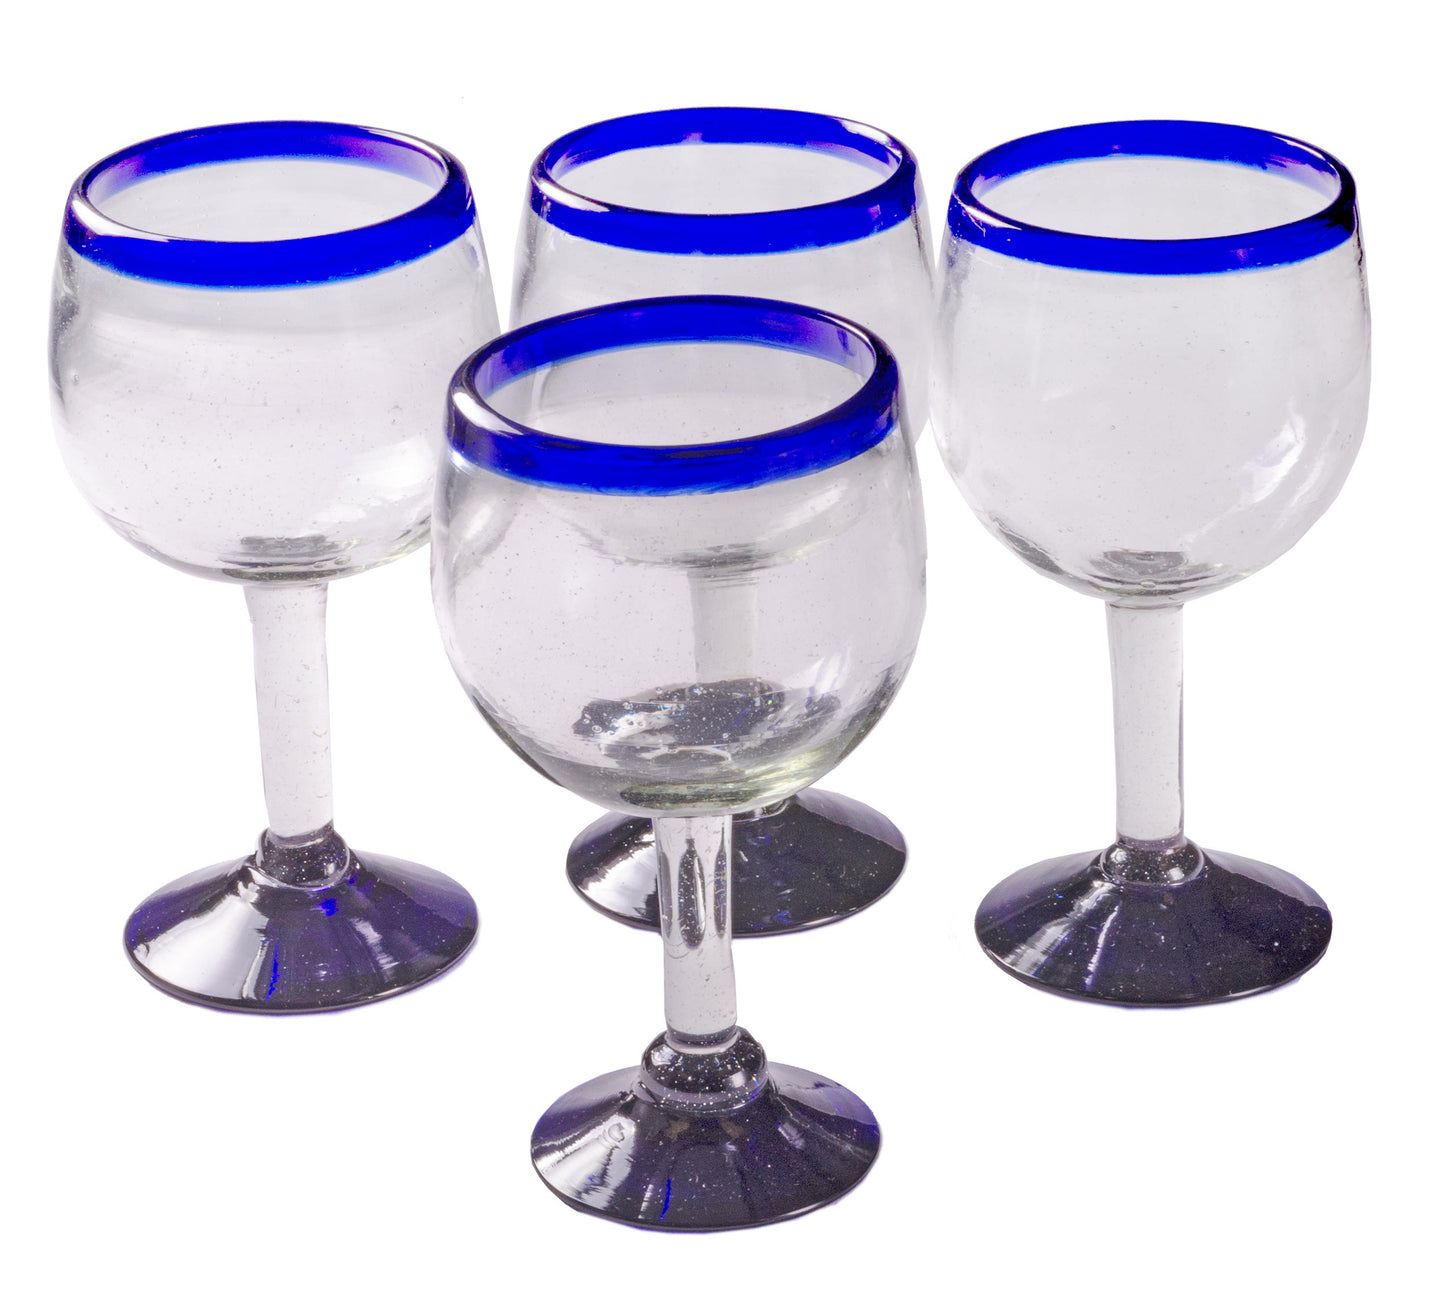 Small Wine Glasses - Matching Set of 3 - Different Colors - 4.5 Tall - 1  ounce